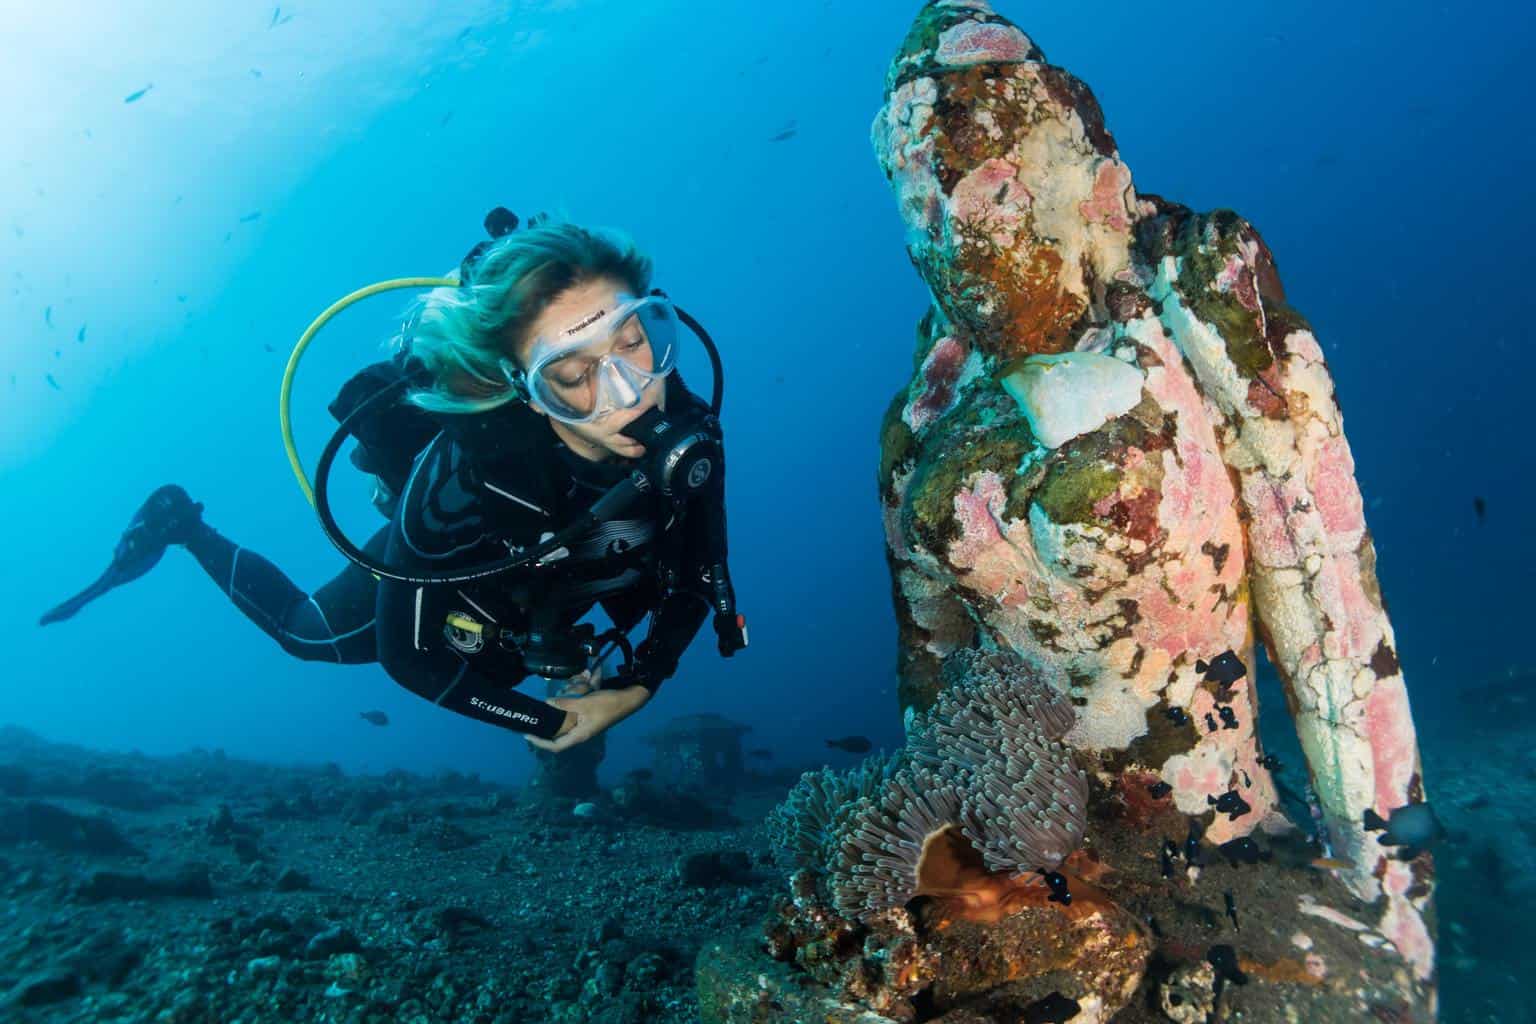 Does Scuba Diving Get Boring? (+ 10 Possible Reasons)